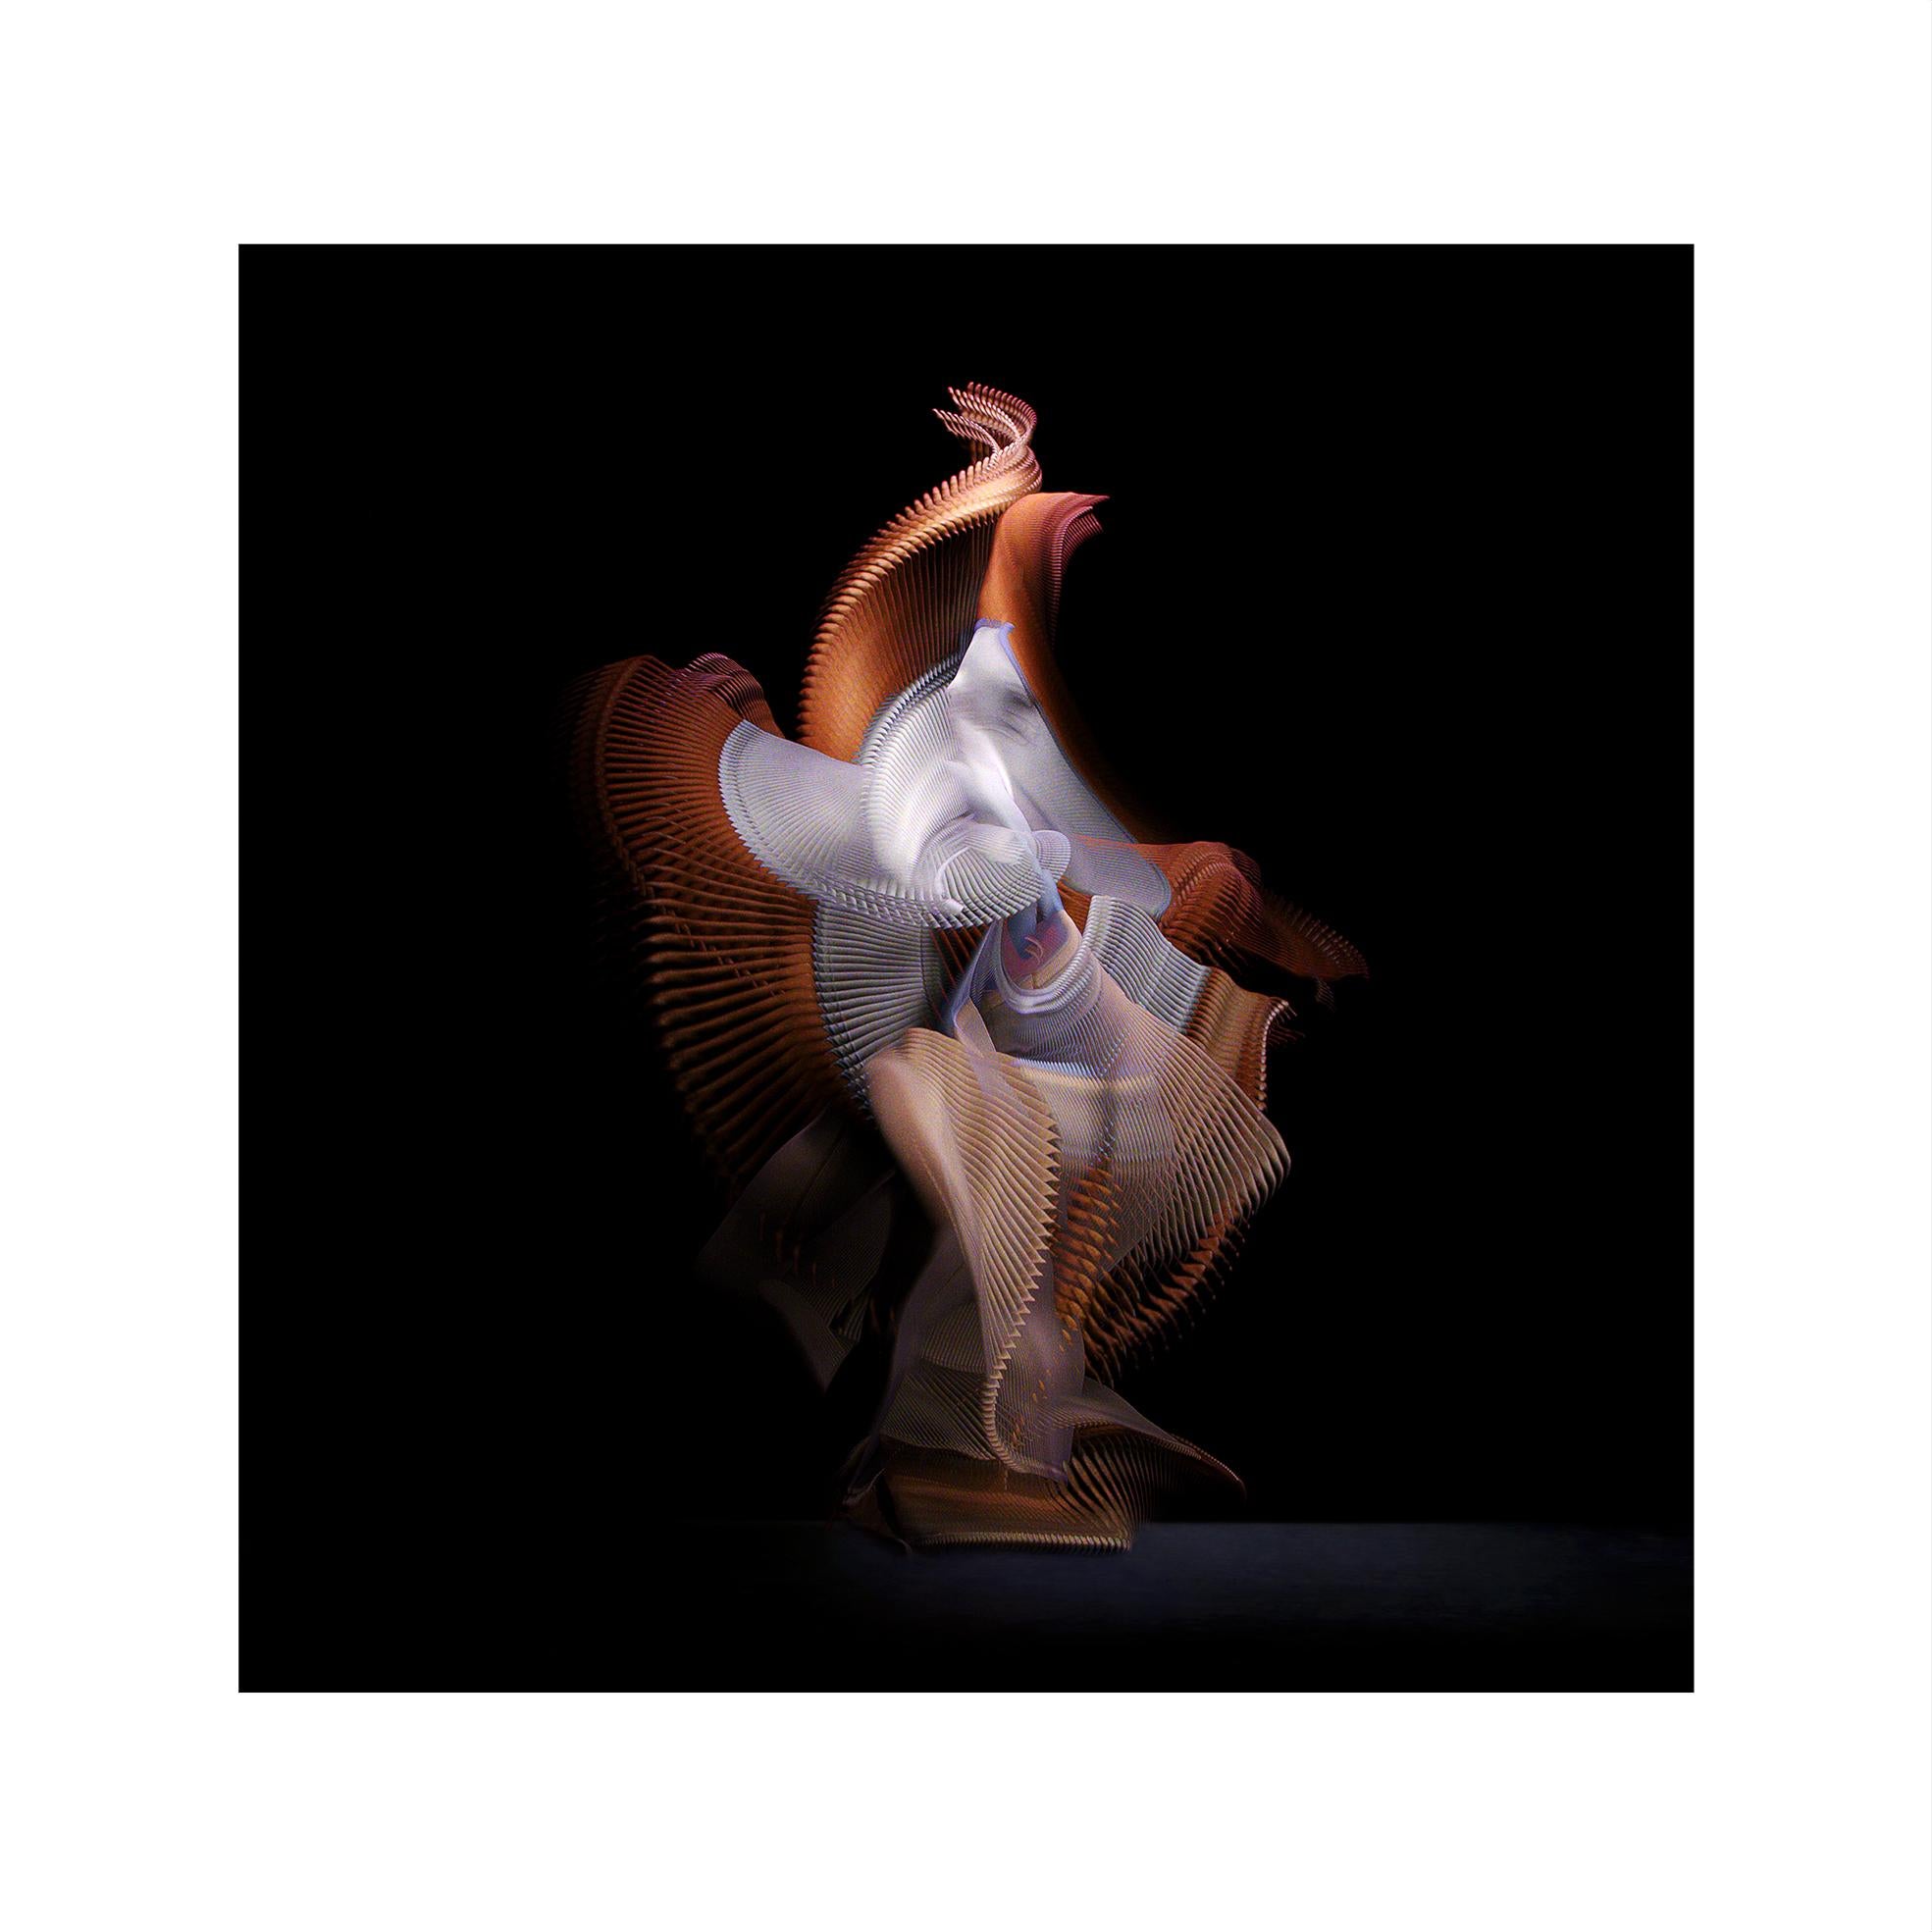 Giles Revell      Portrait Photograph - Abstract Dancers, White 1, 2019 by Giles Revell - Photography, Contemporary